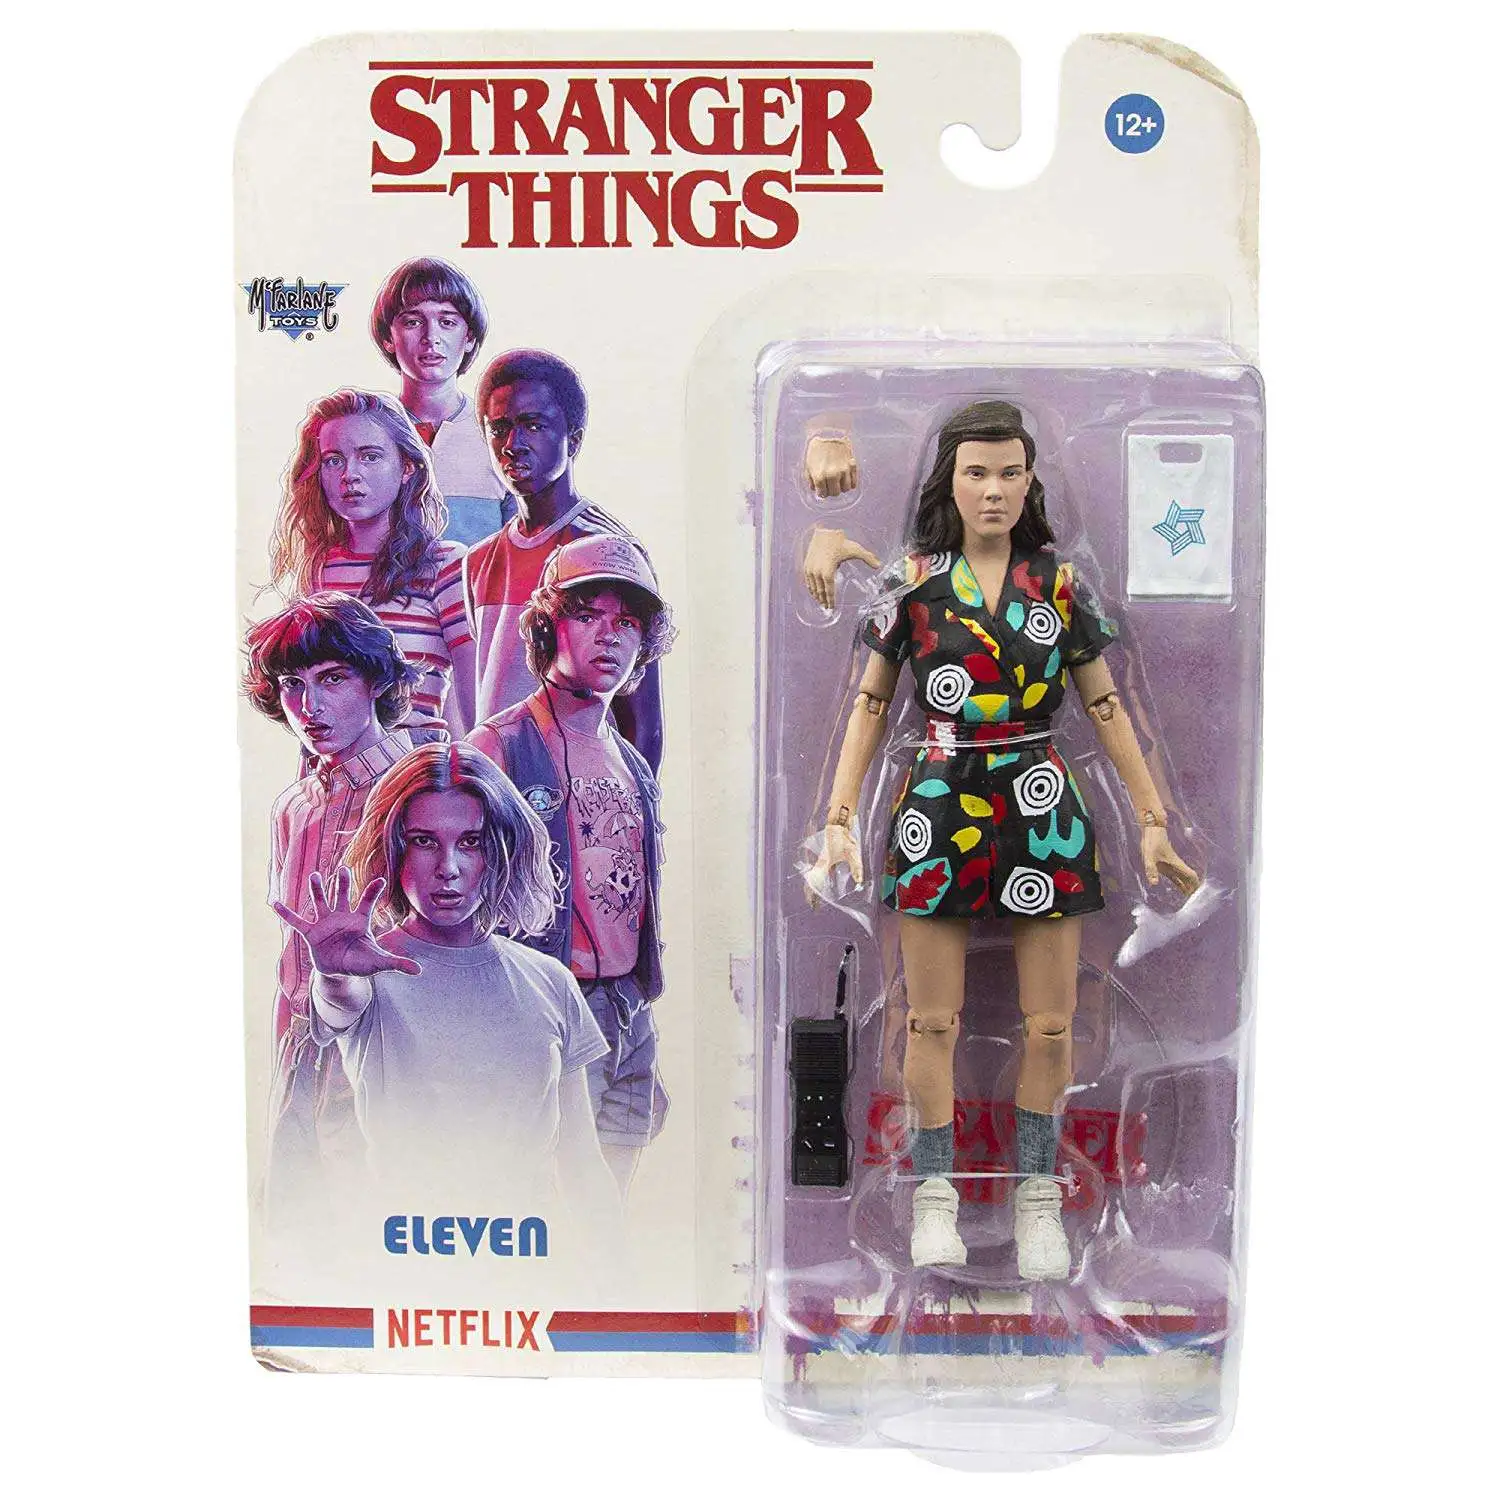 Netflix Stranger Things Series 3 Mike 2018 Figure McFarlane Toys for sale online 